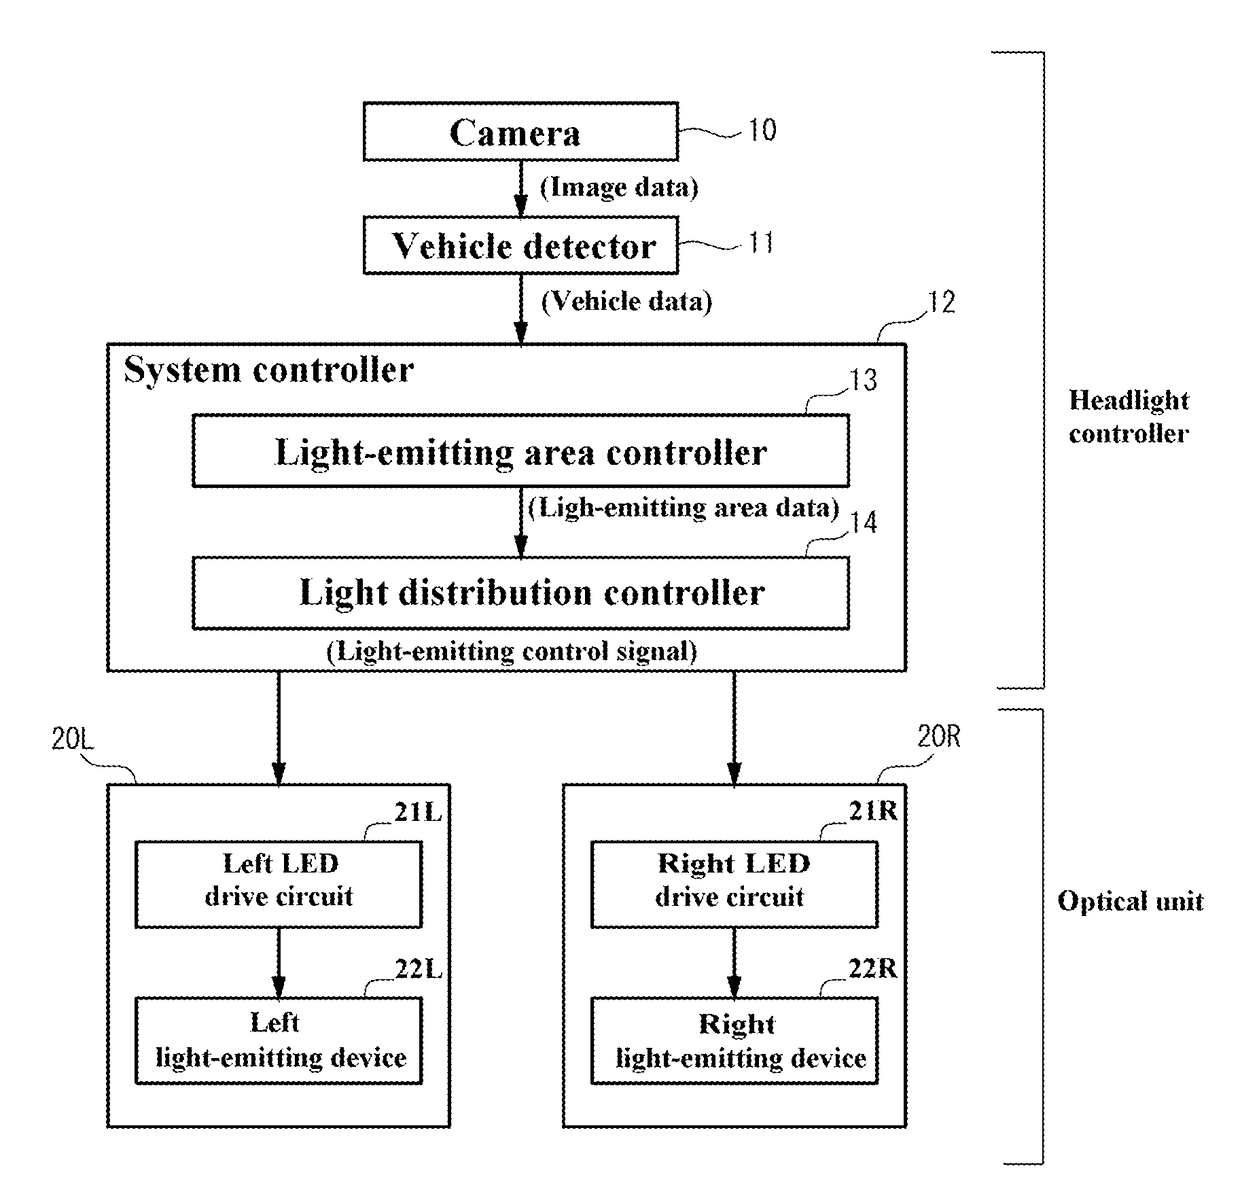 Headlight controller and vehicle headlight system